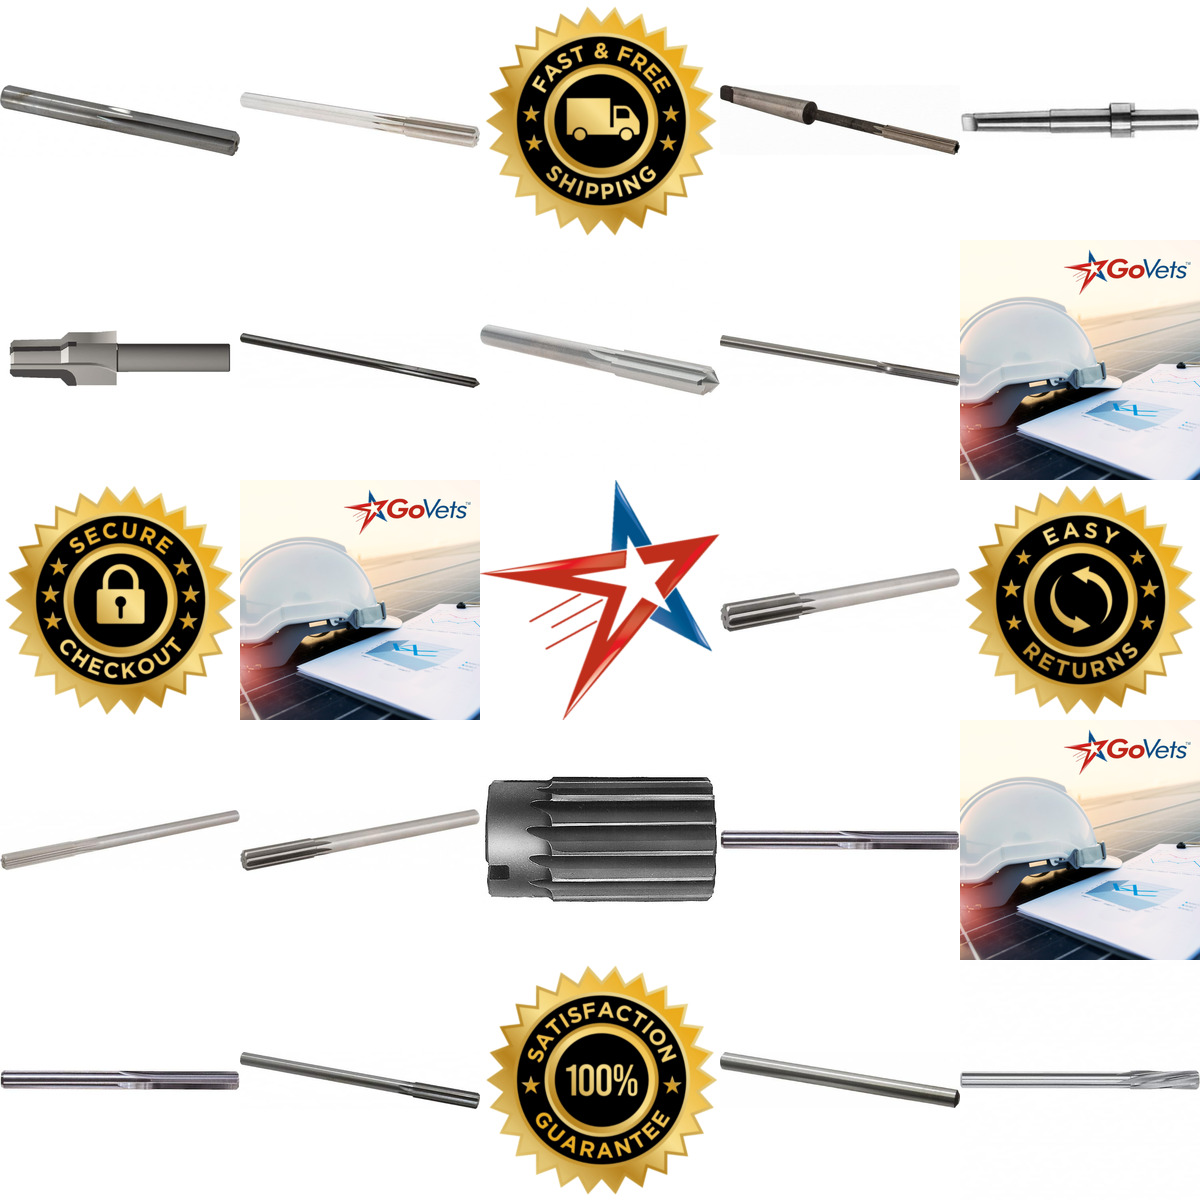 A selection of Reamers products on GoVets